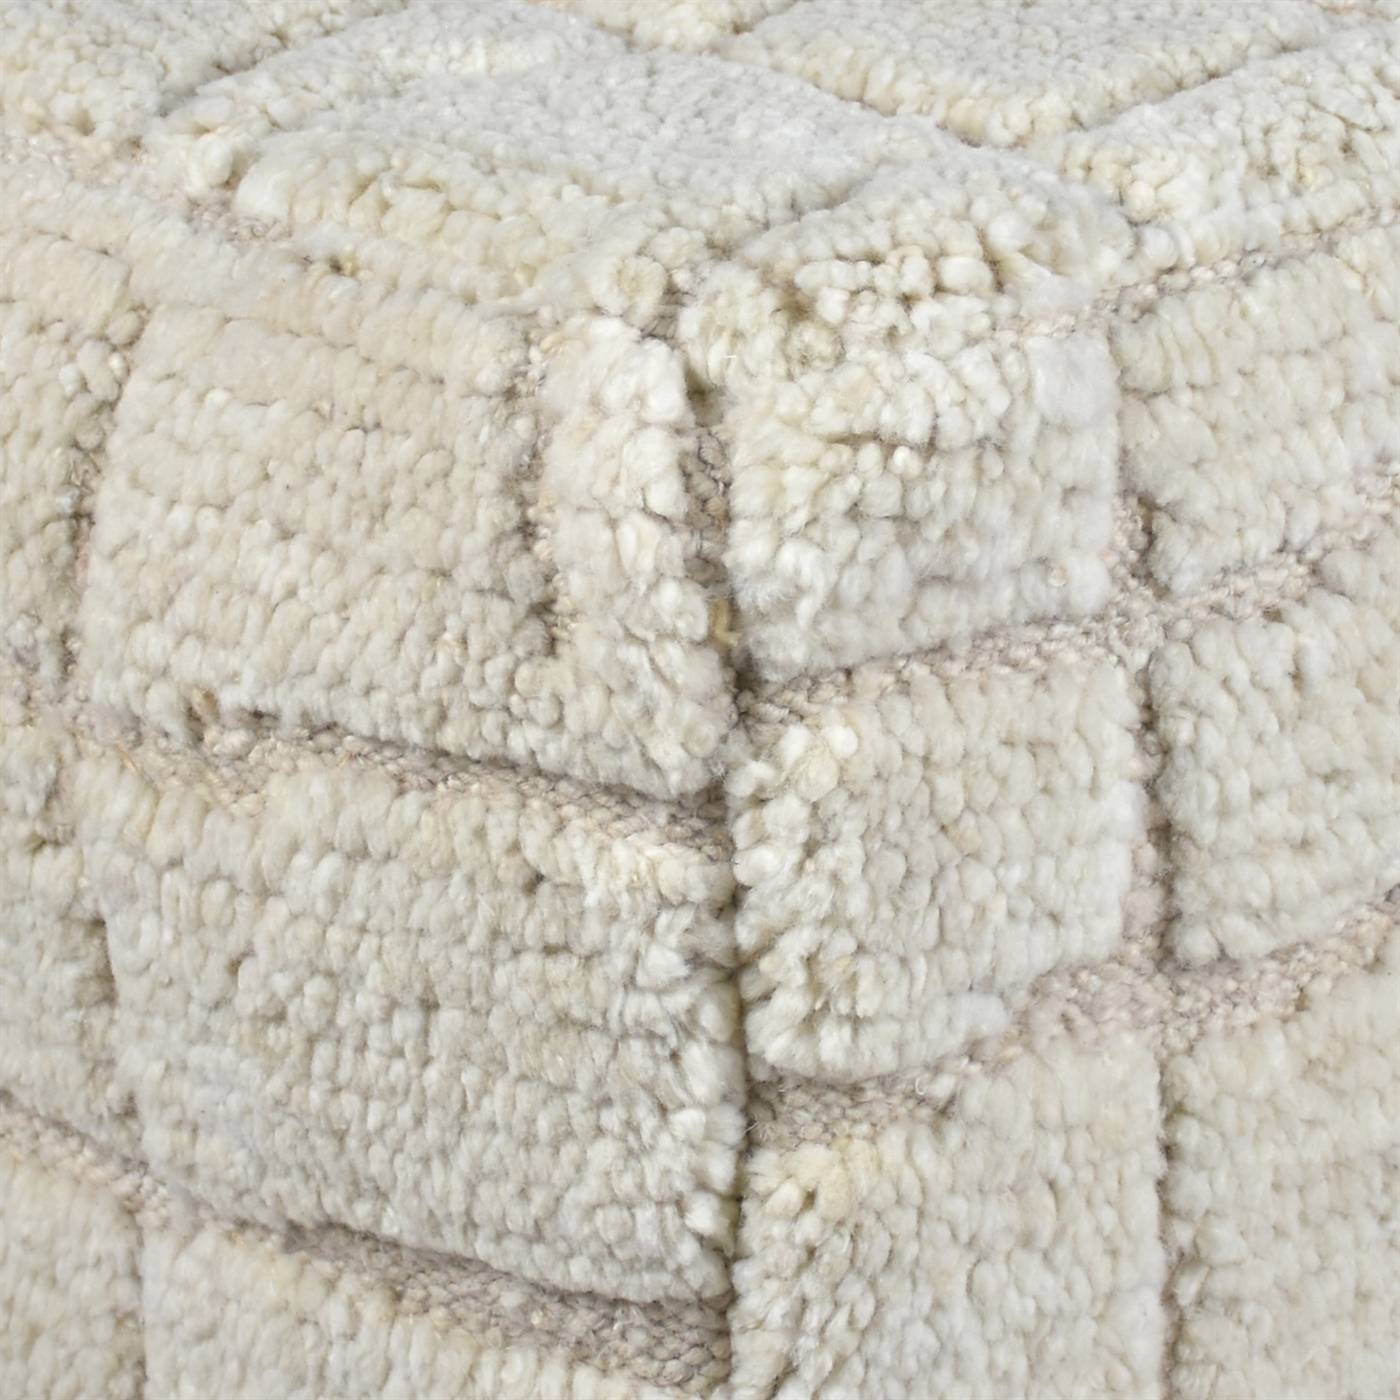 Luxton Pouf, 40x40x40 cm, Natural White, NZ Wool, Hand Knotted, Handknotted, All Cut